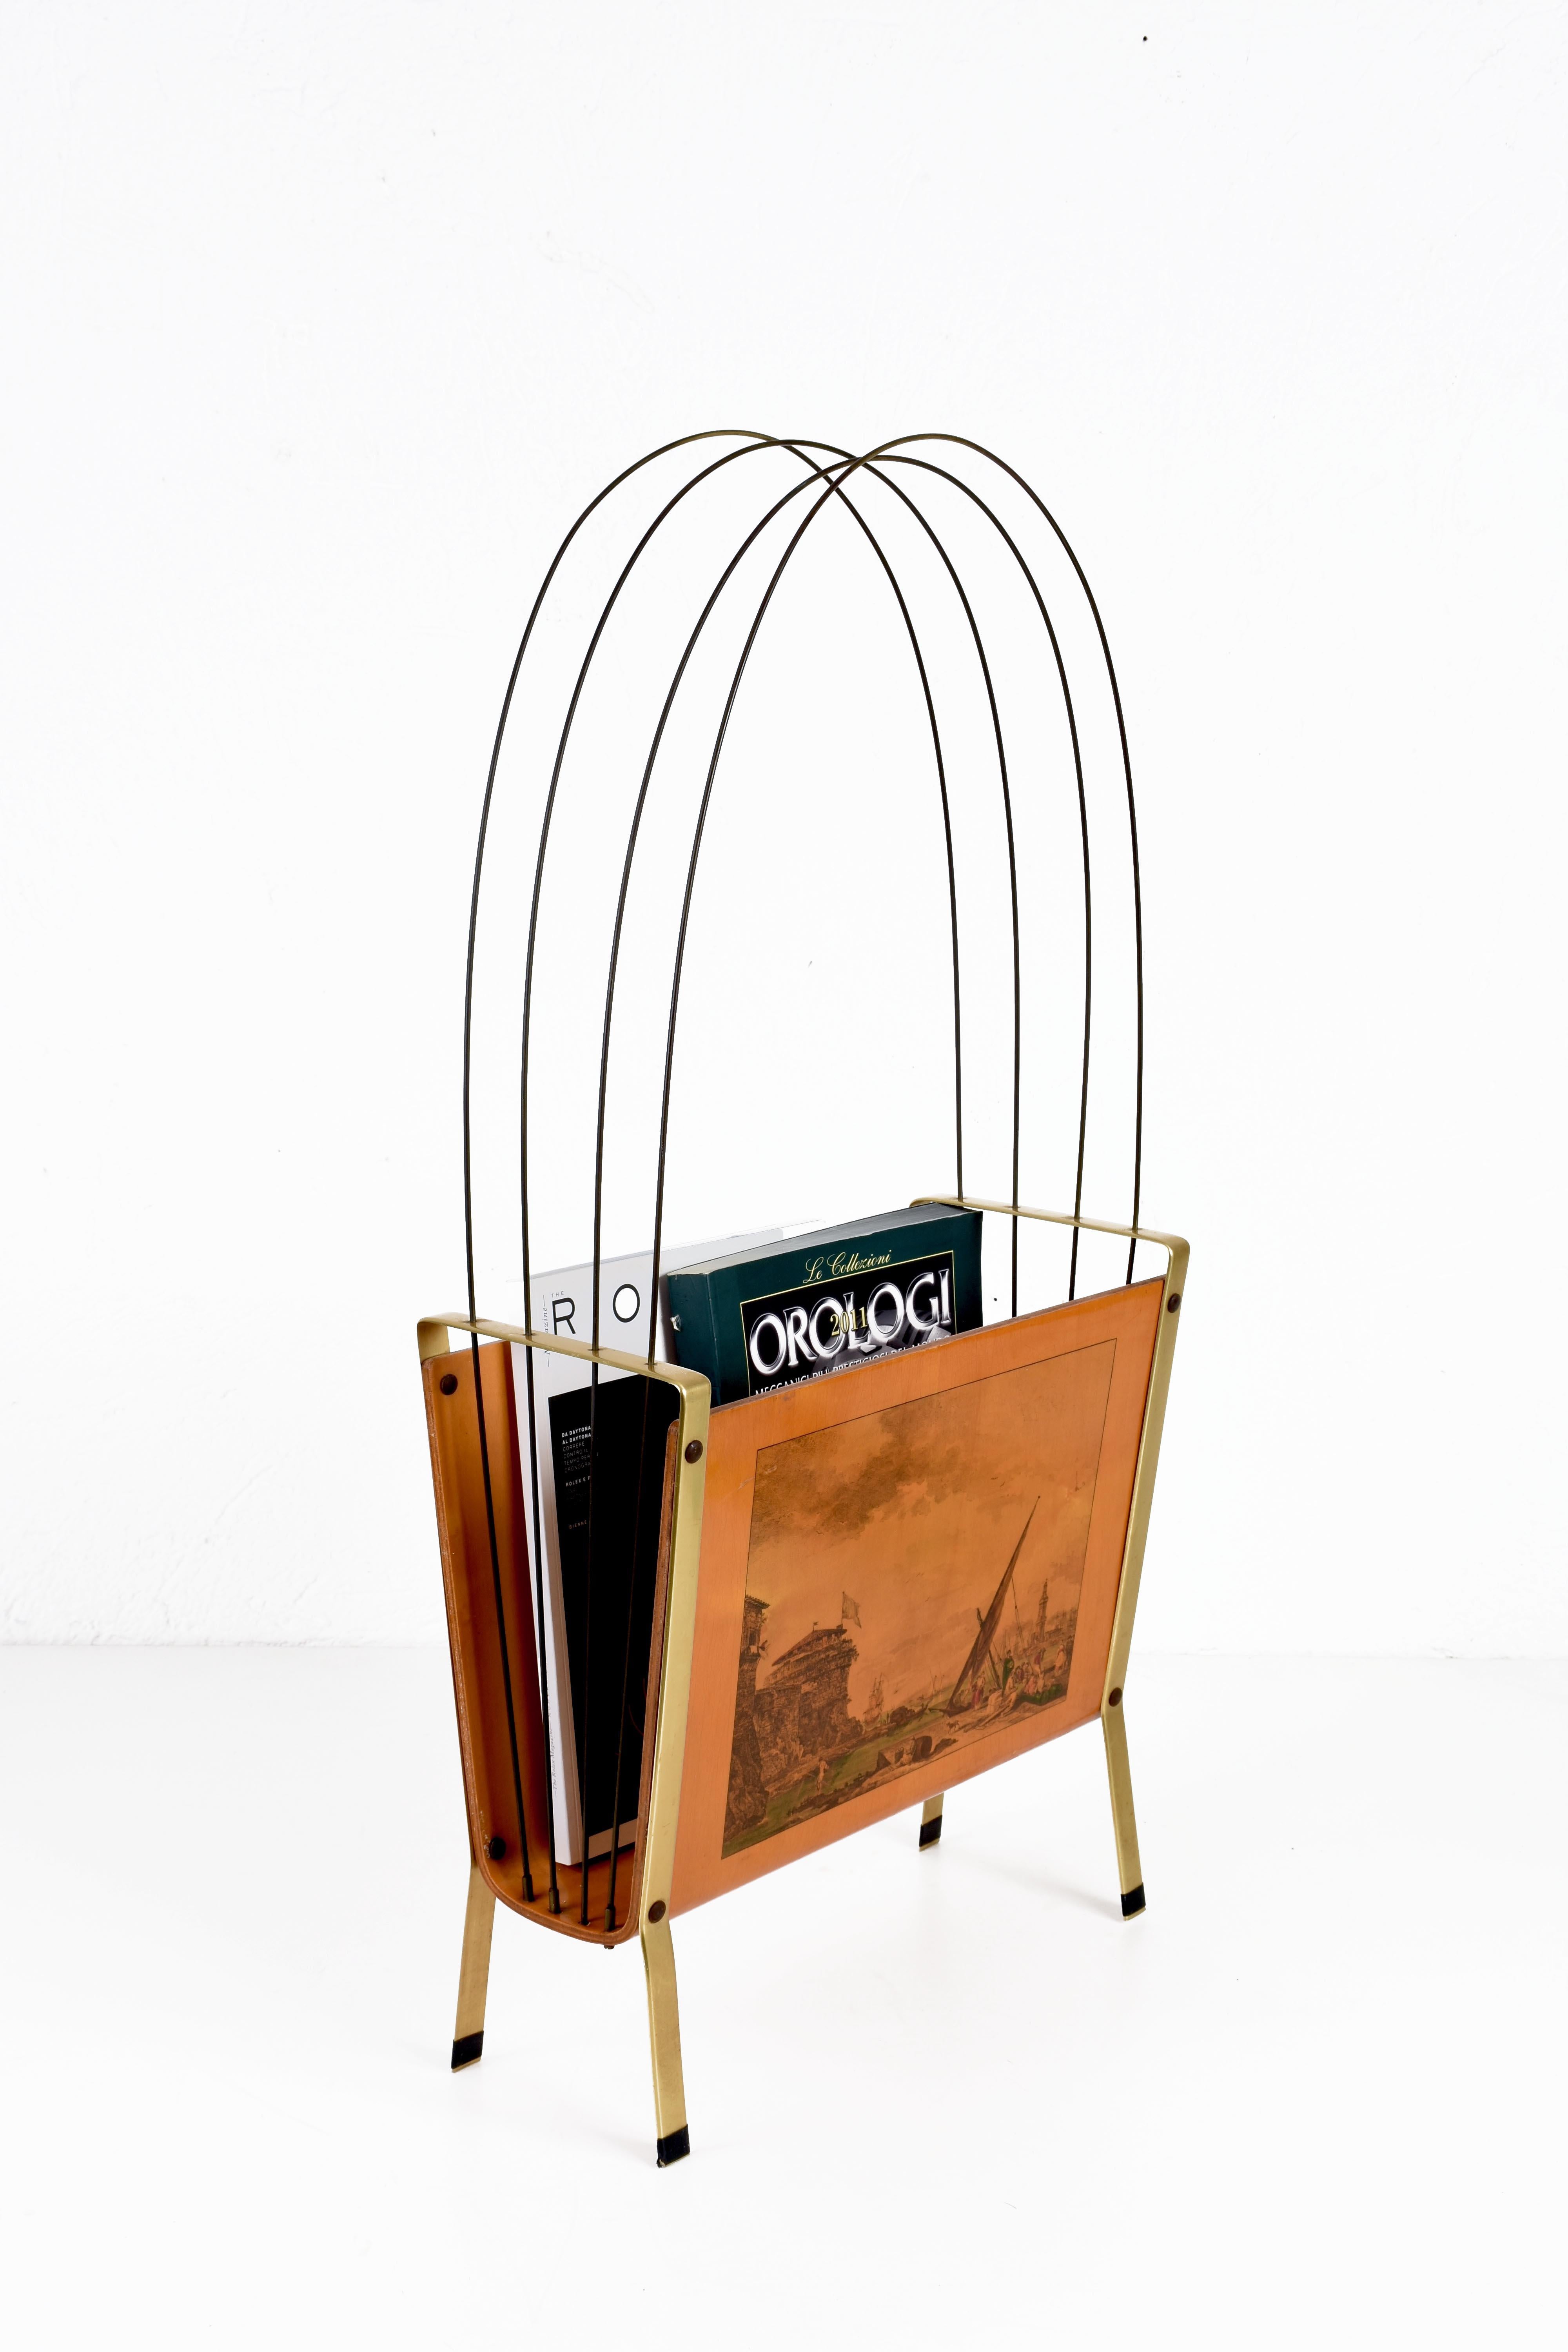 Amazing midcentury enameled metal, maple, teak and brass magazine rack. This unique piece was produced in Italy during 1950s.

This item is breathtaking has its structure is made of multiple layers of teak and maple wood, with curved solid brass